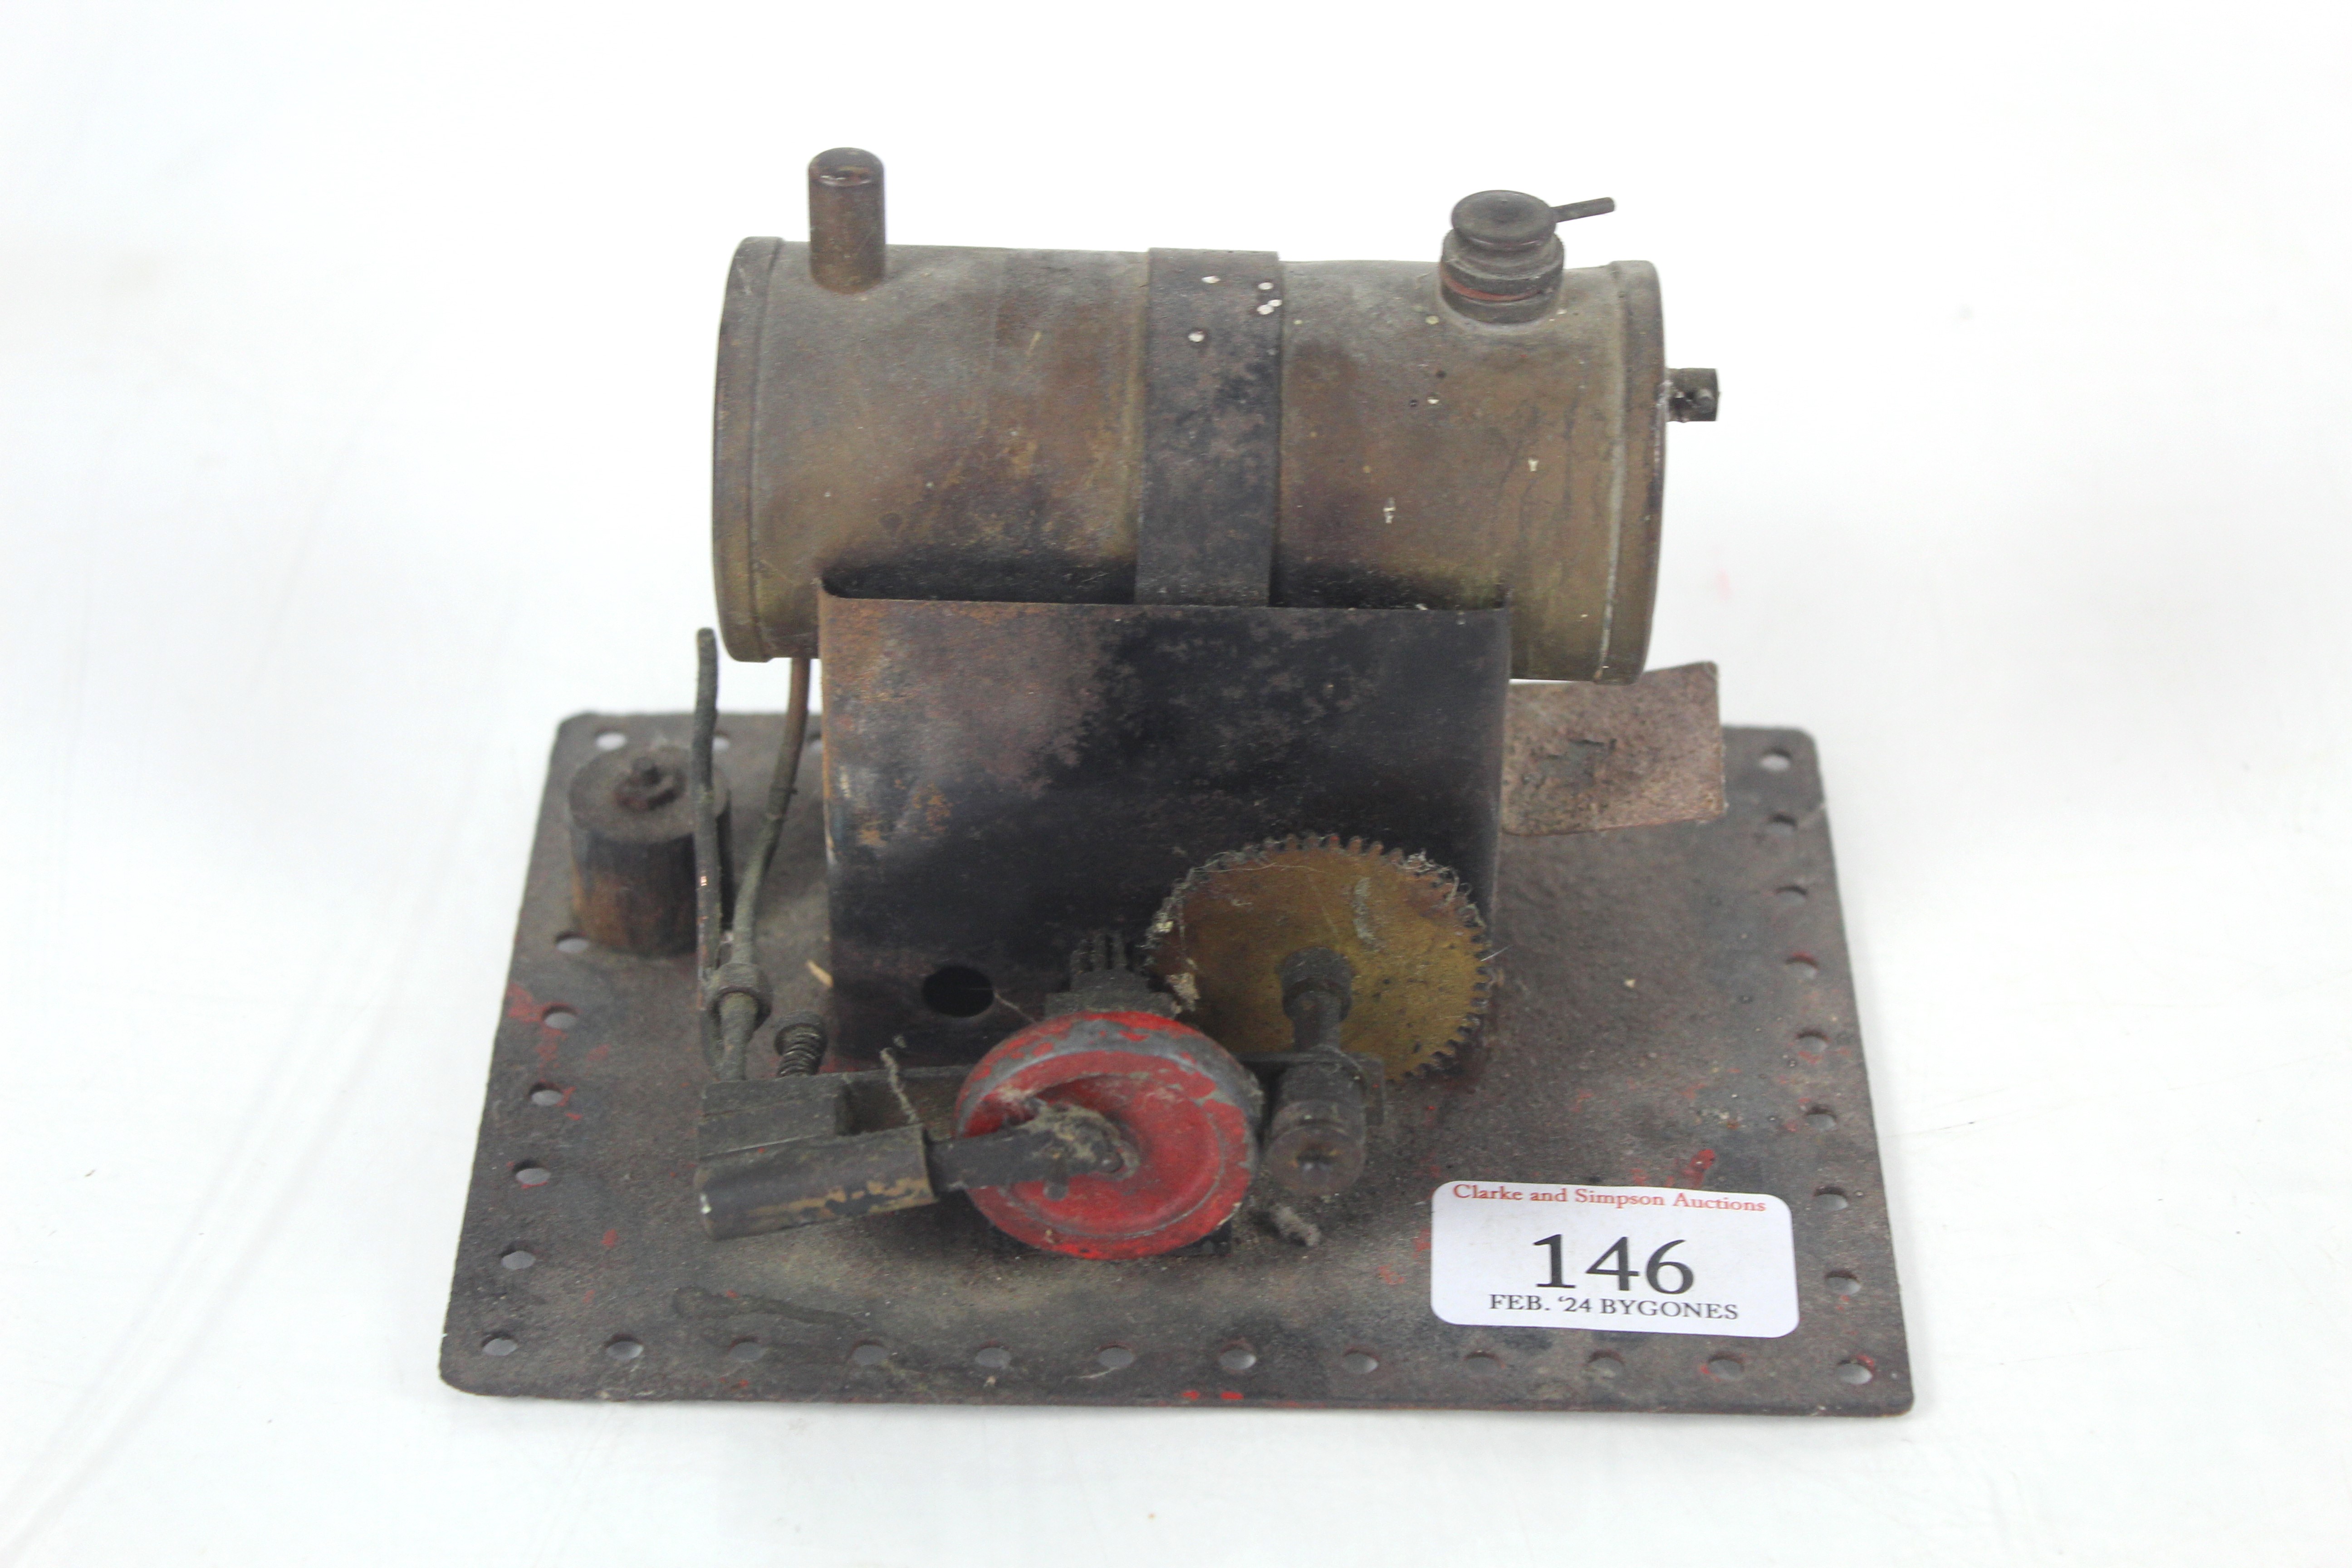 A small model steam engine with pulley wheel (no b